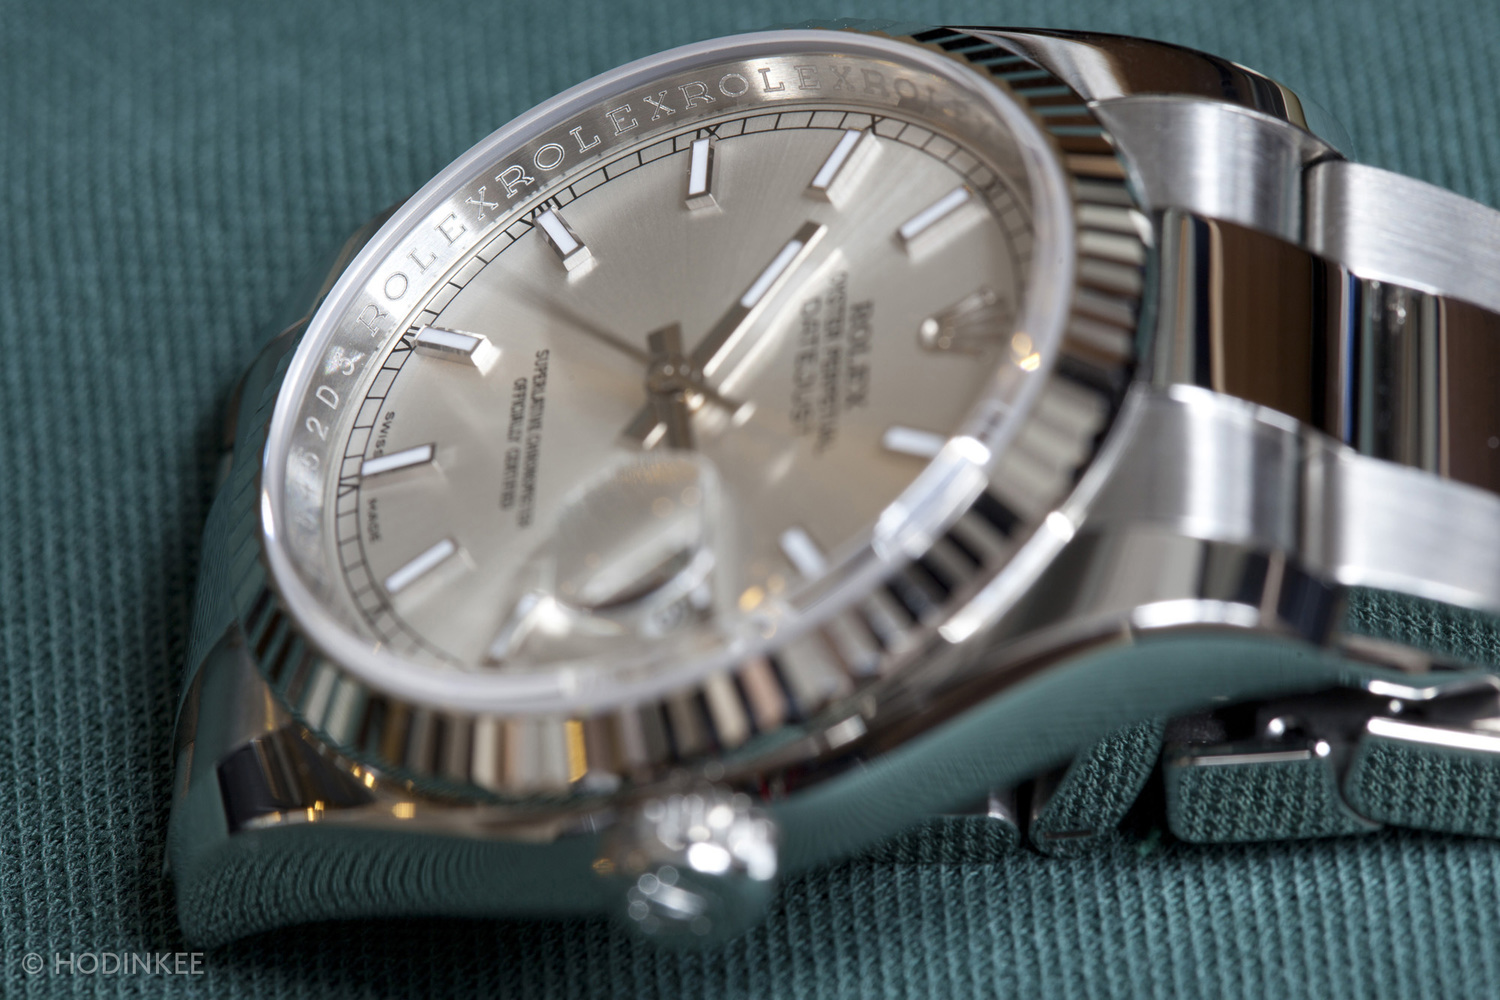 A Week On The Wrist: The Rolex Datejust 